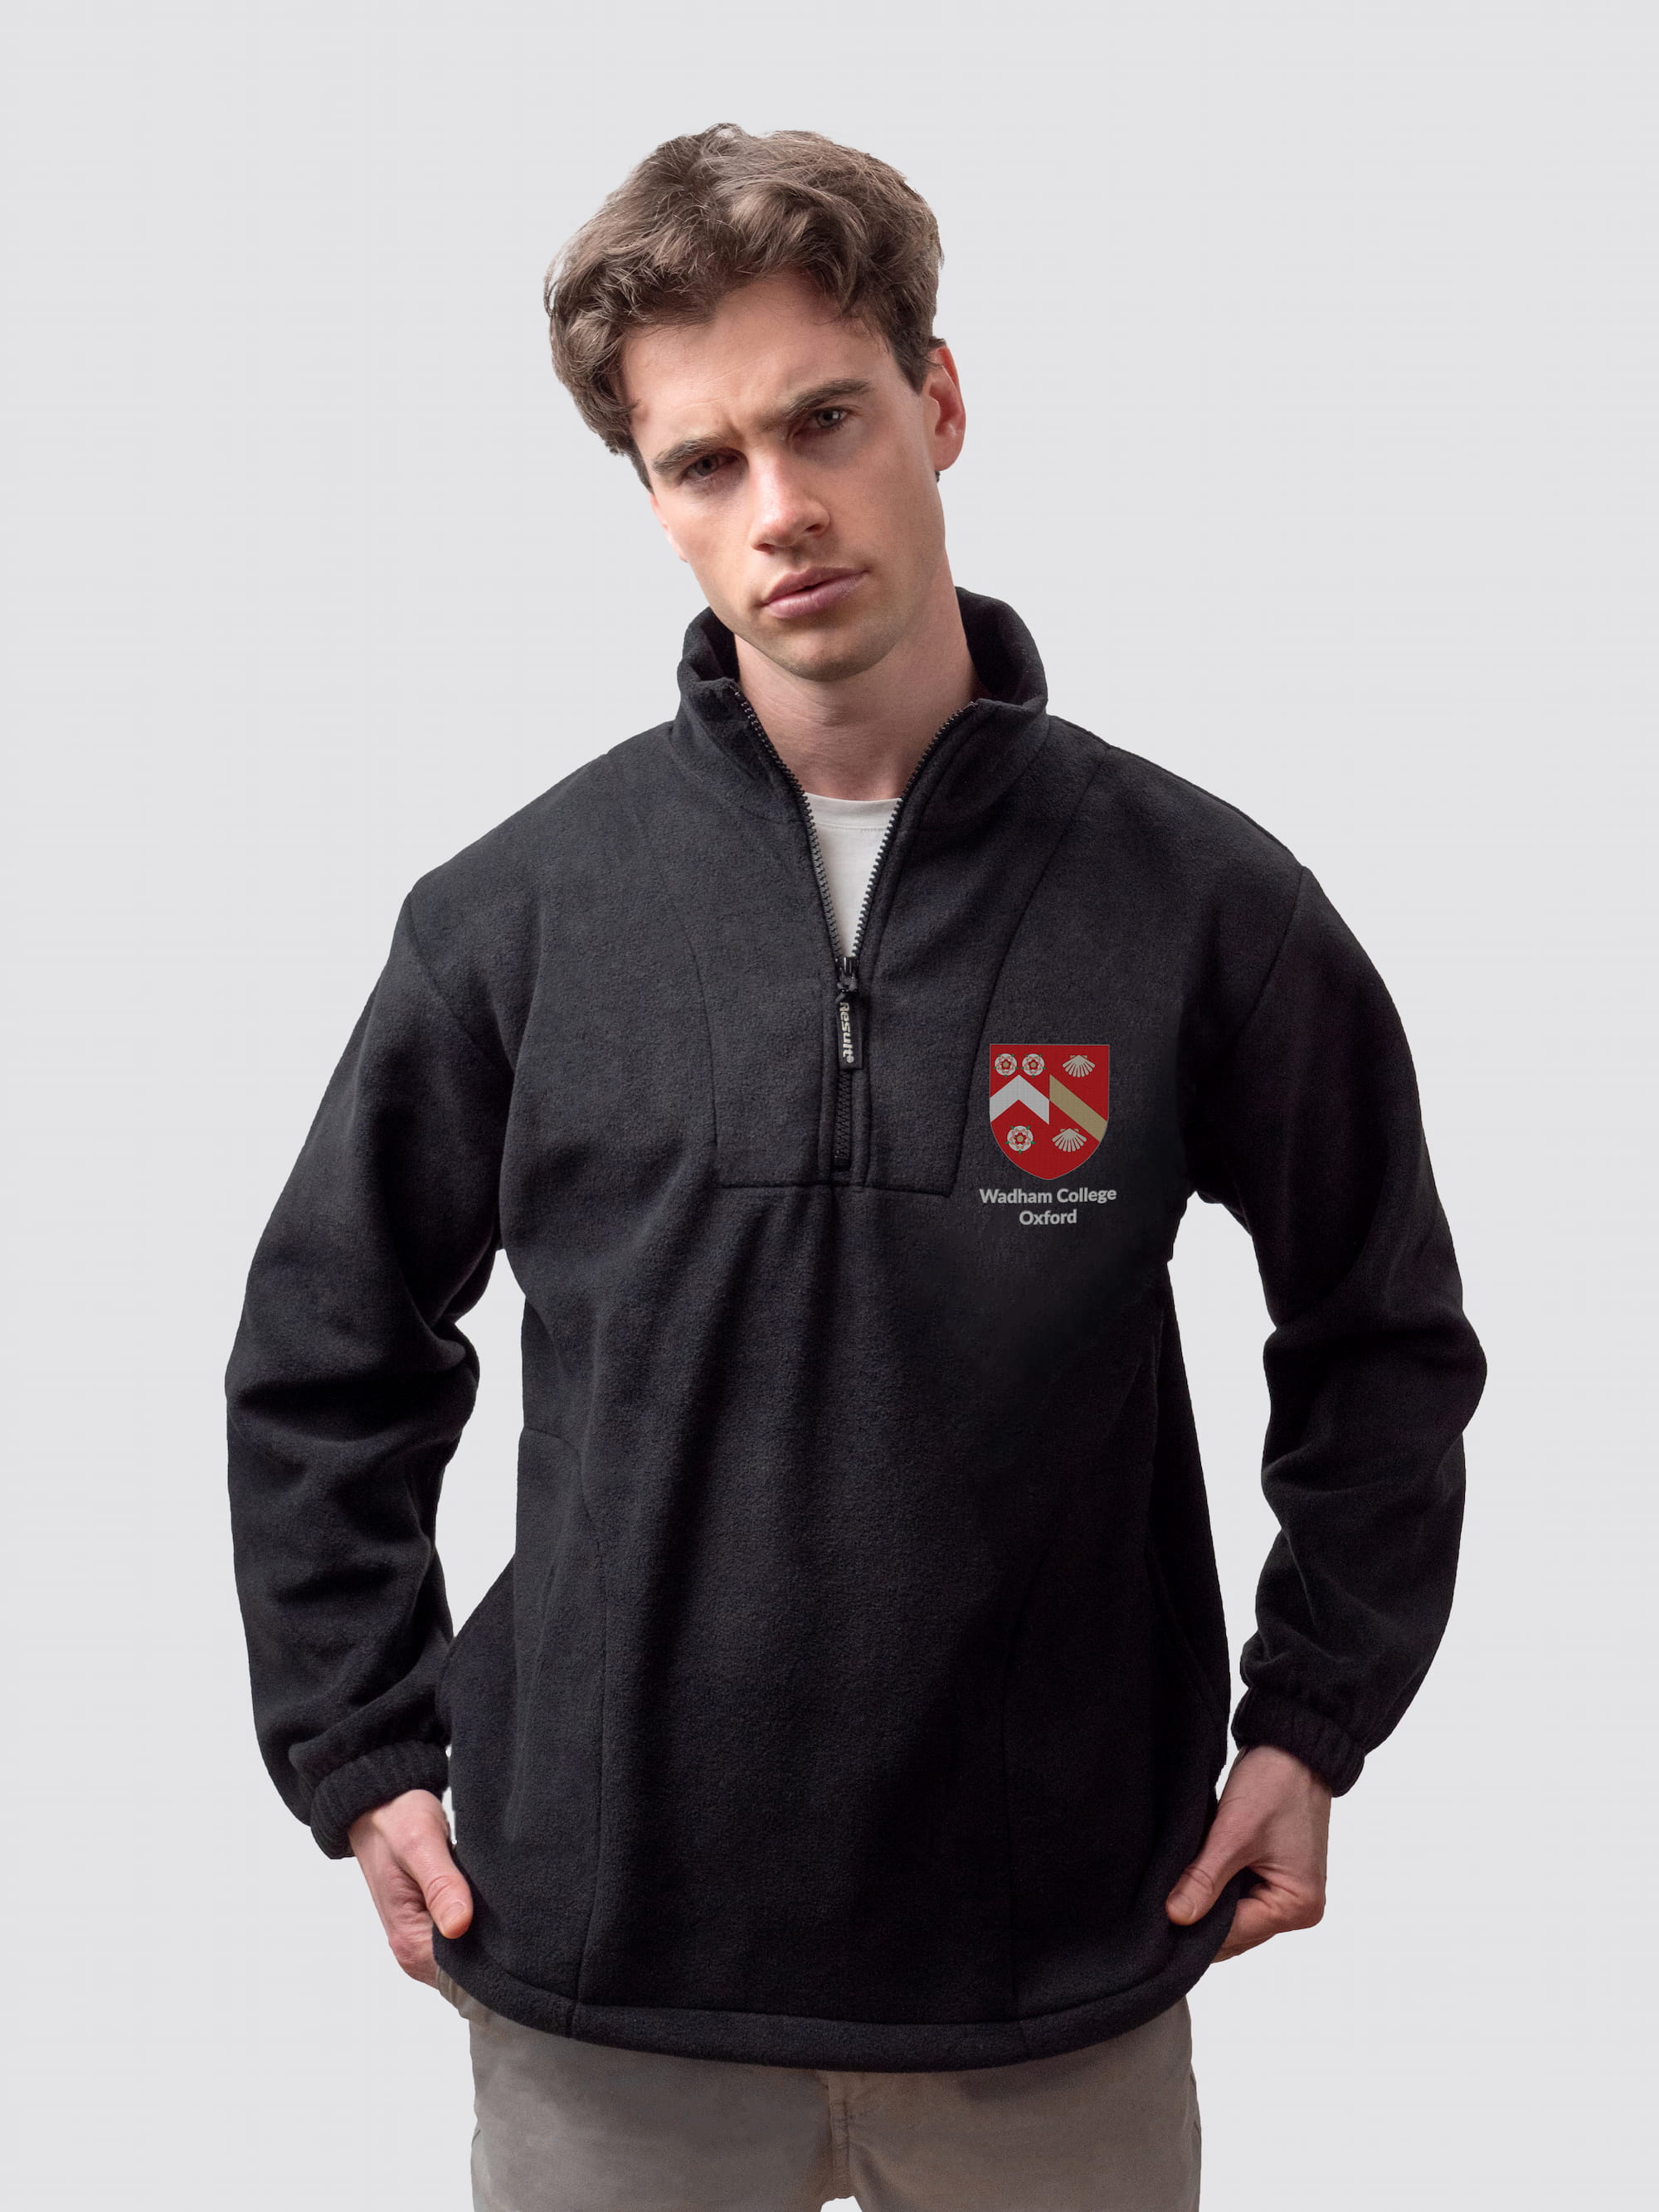 Oxford university fleece, with custom embroidered initials and Wadham crest